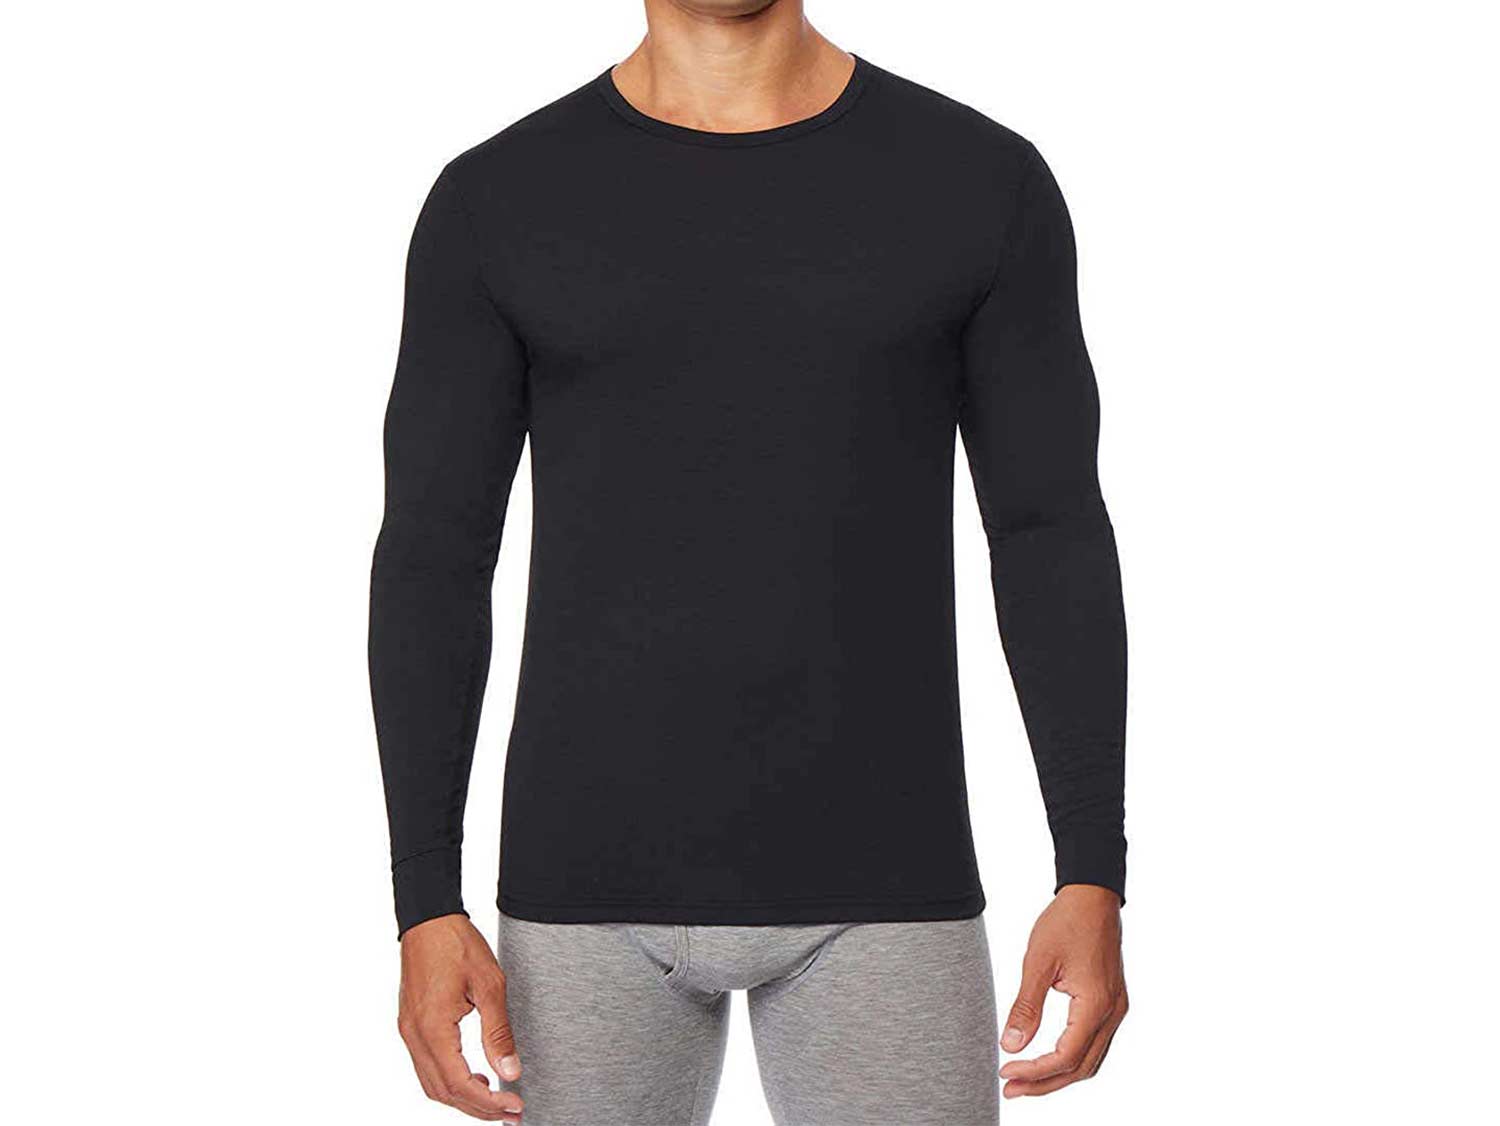 Best Long Johns: Thermal Underwear for Hunting, Fishing, and More